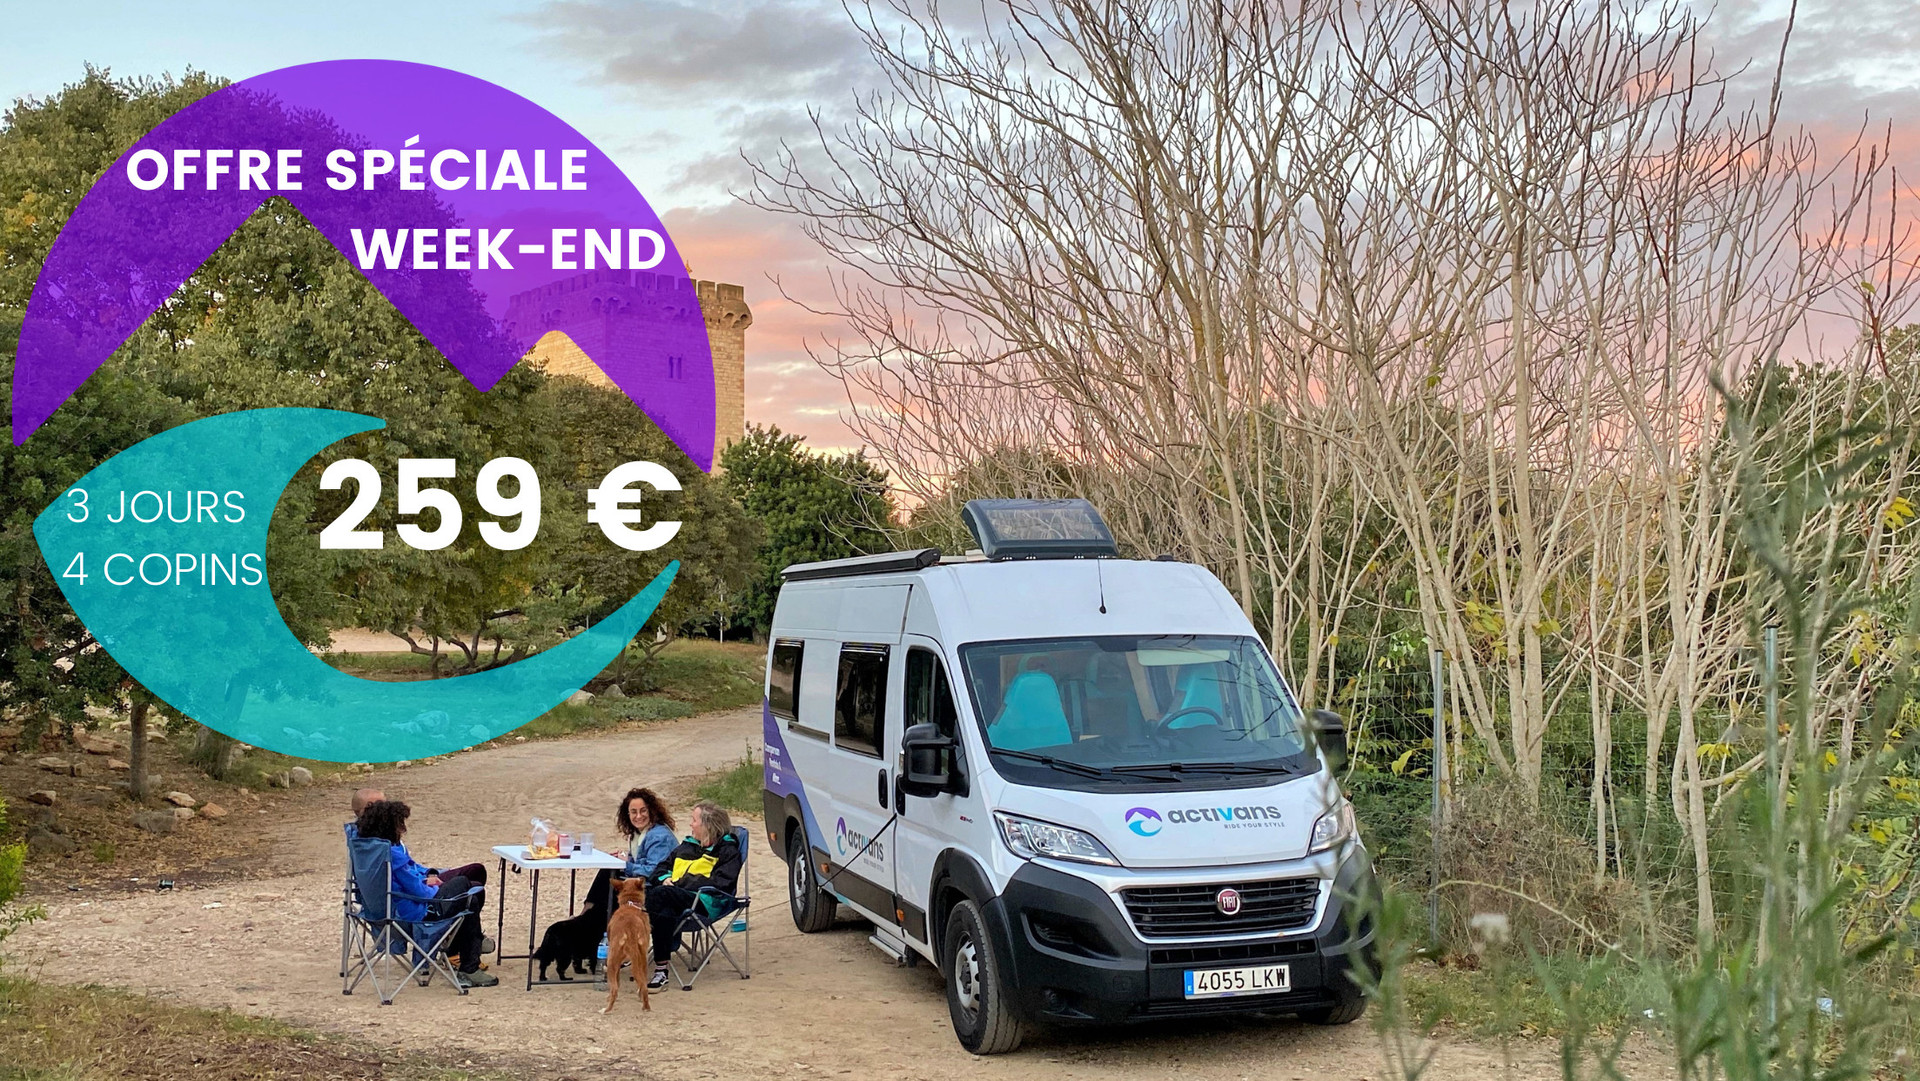 Location camping car offre spéciale week-end